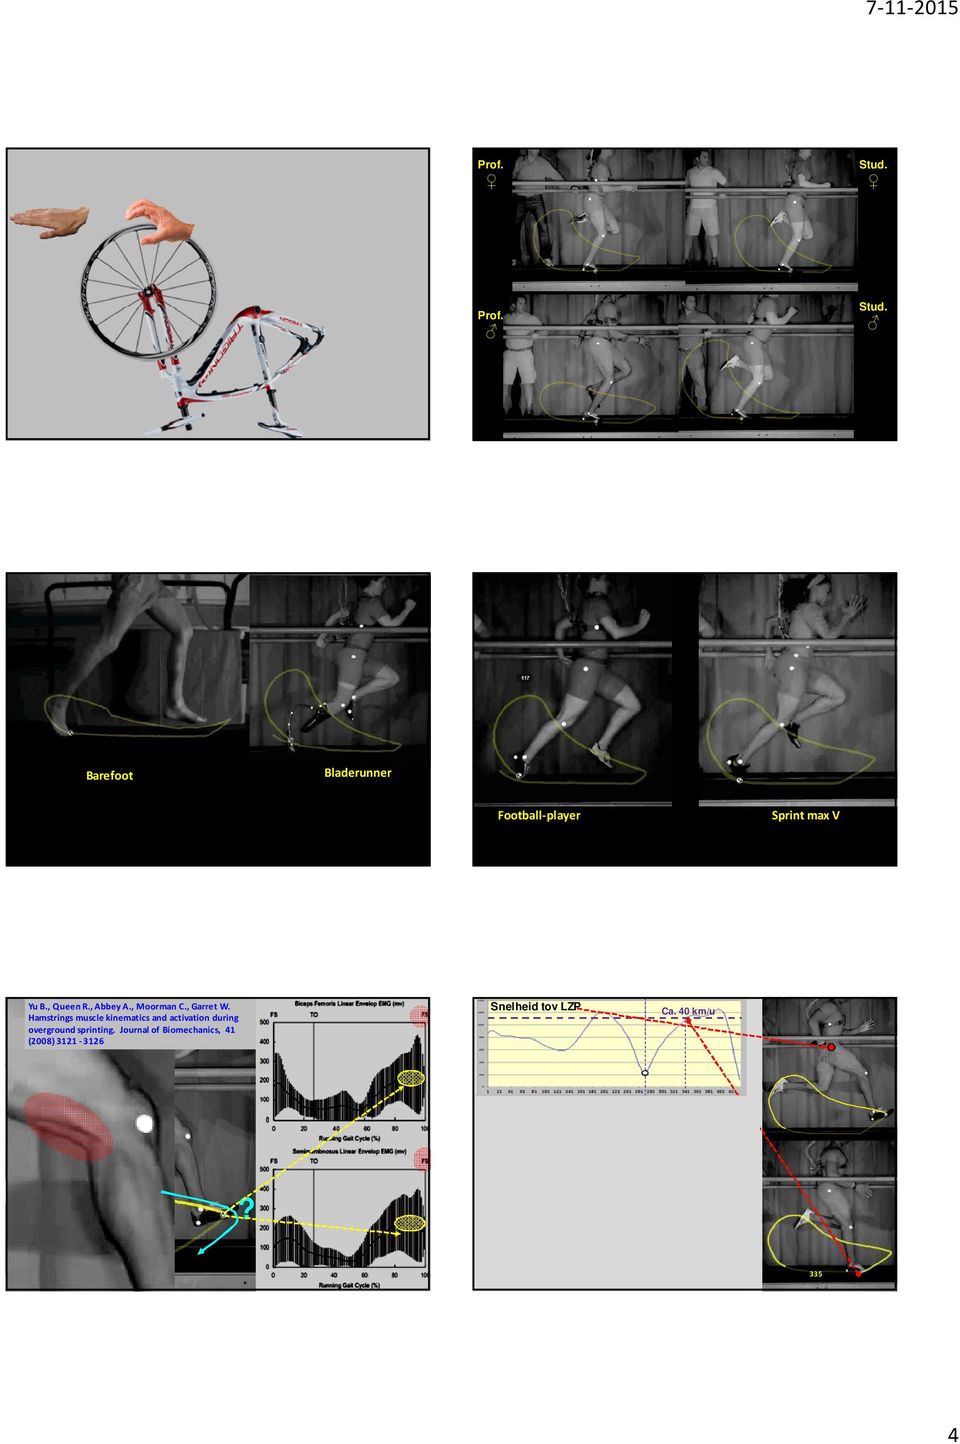 Hamstrings muscle kinematics and activation during overground sprinting.